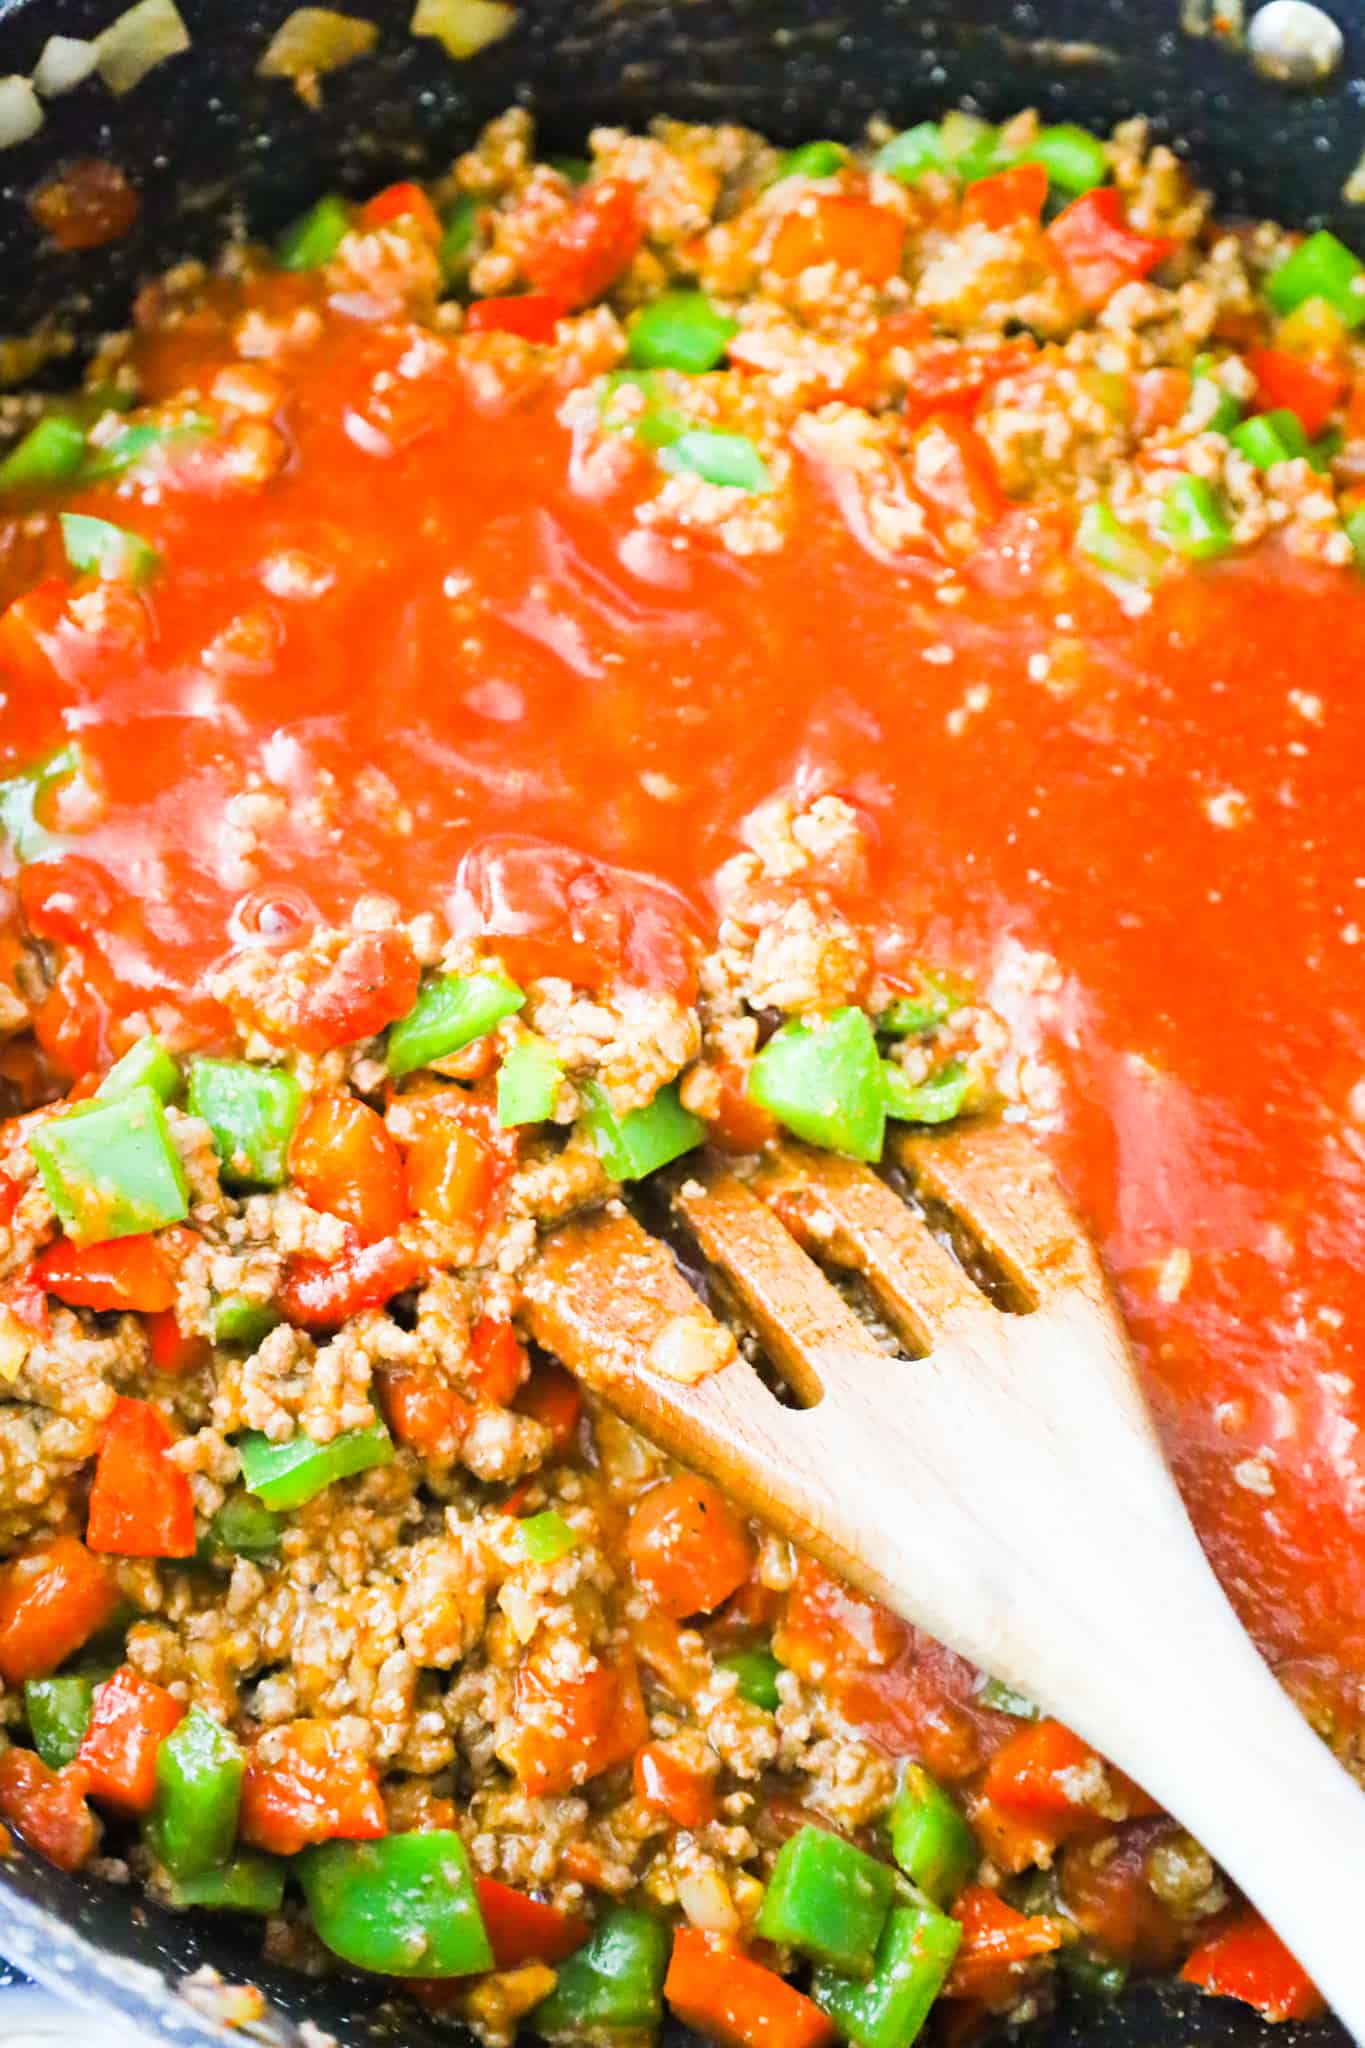 tomato sauce added to ground beef and peppers mixture in a saute pan